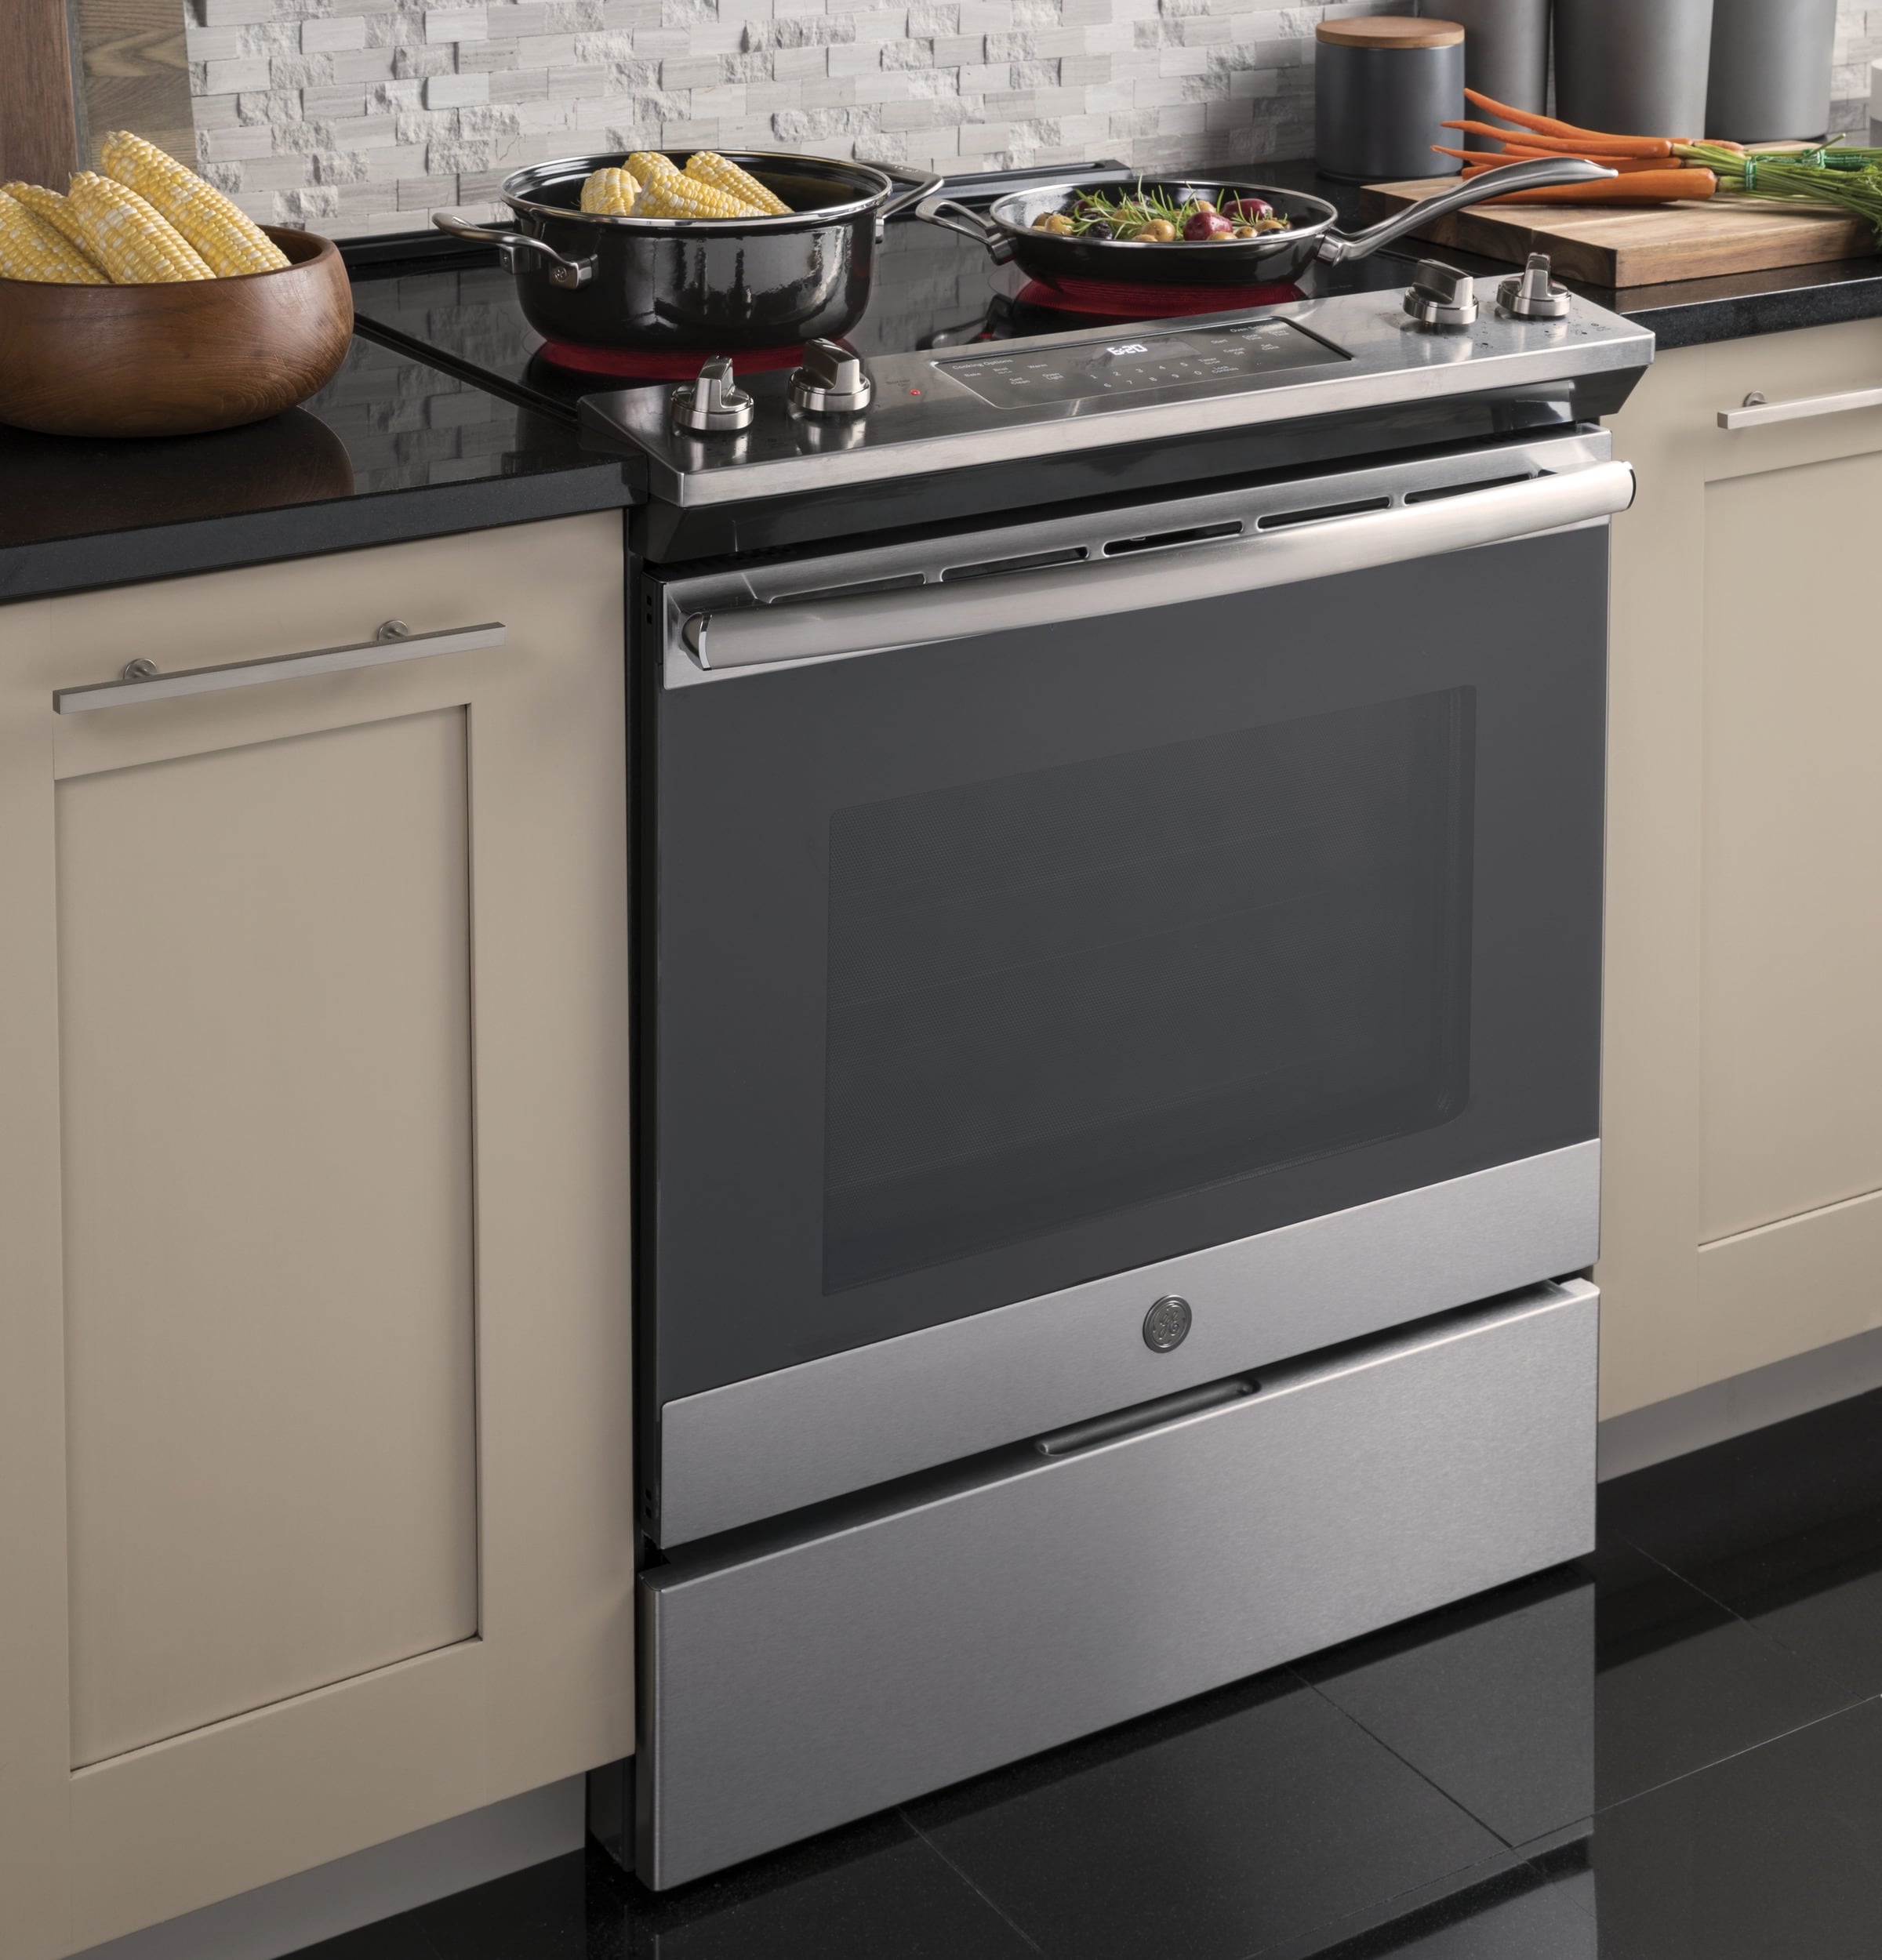 GE 30 in. 5.6 cu. ft. Slide-In Gas Range with Self-Cleaning